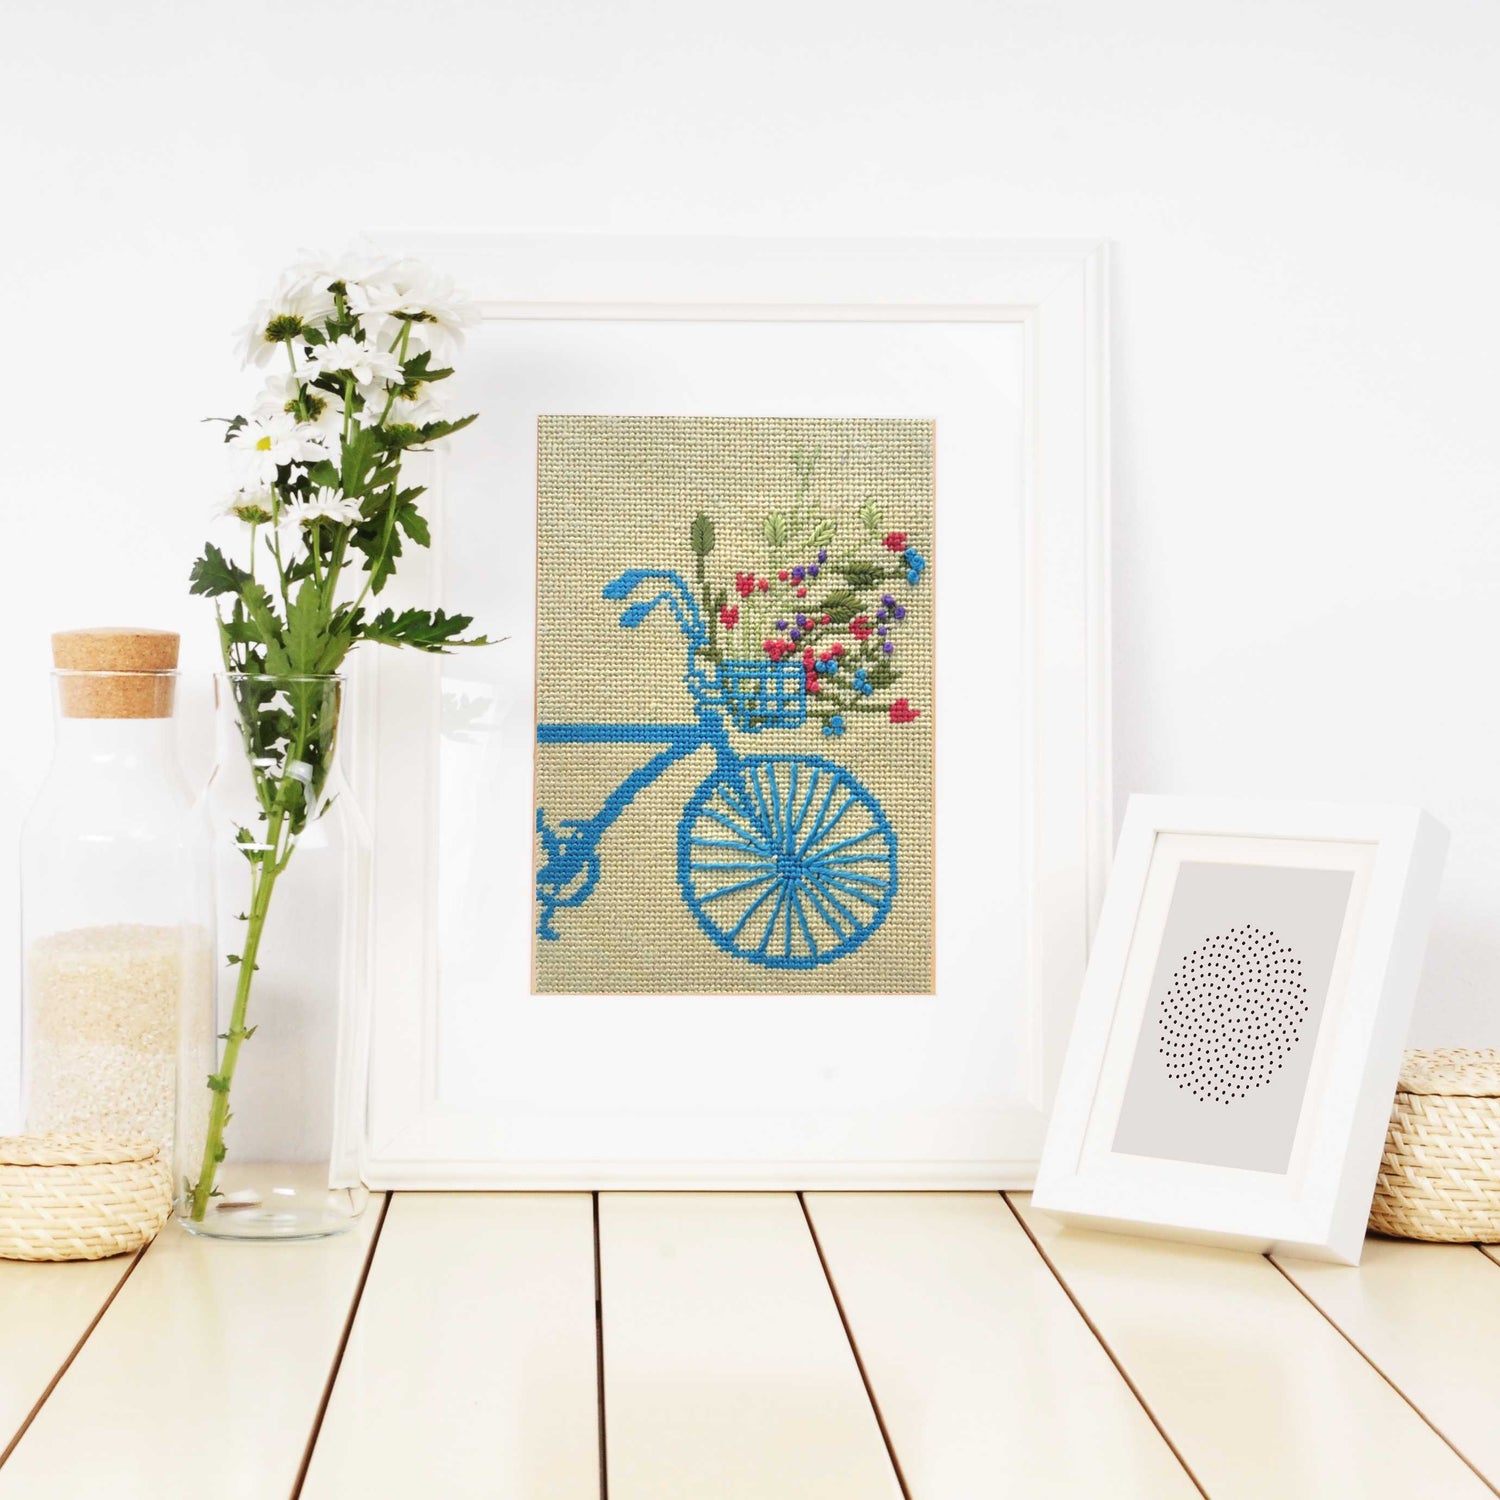 Bike and Wildflowers small needlepoint kit for adults shown in a frame